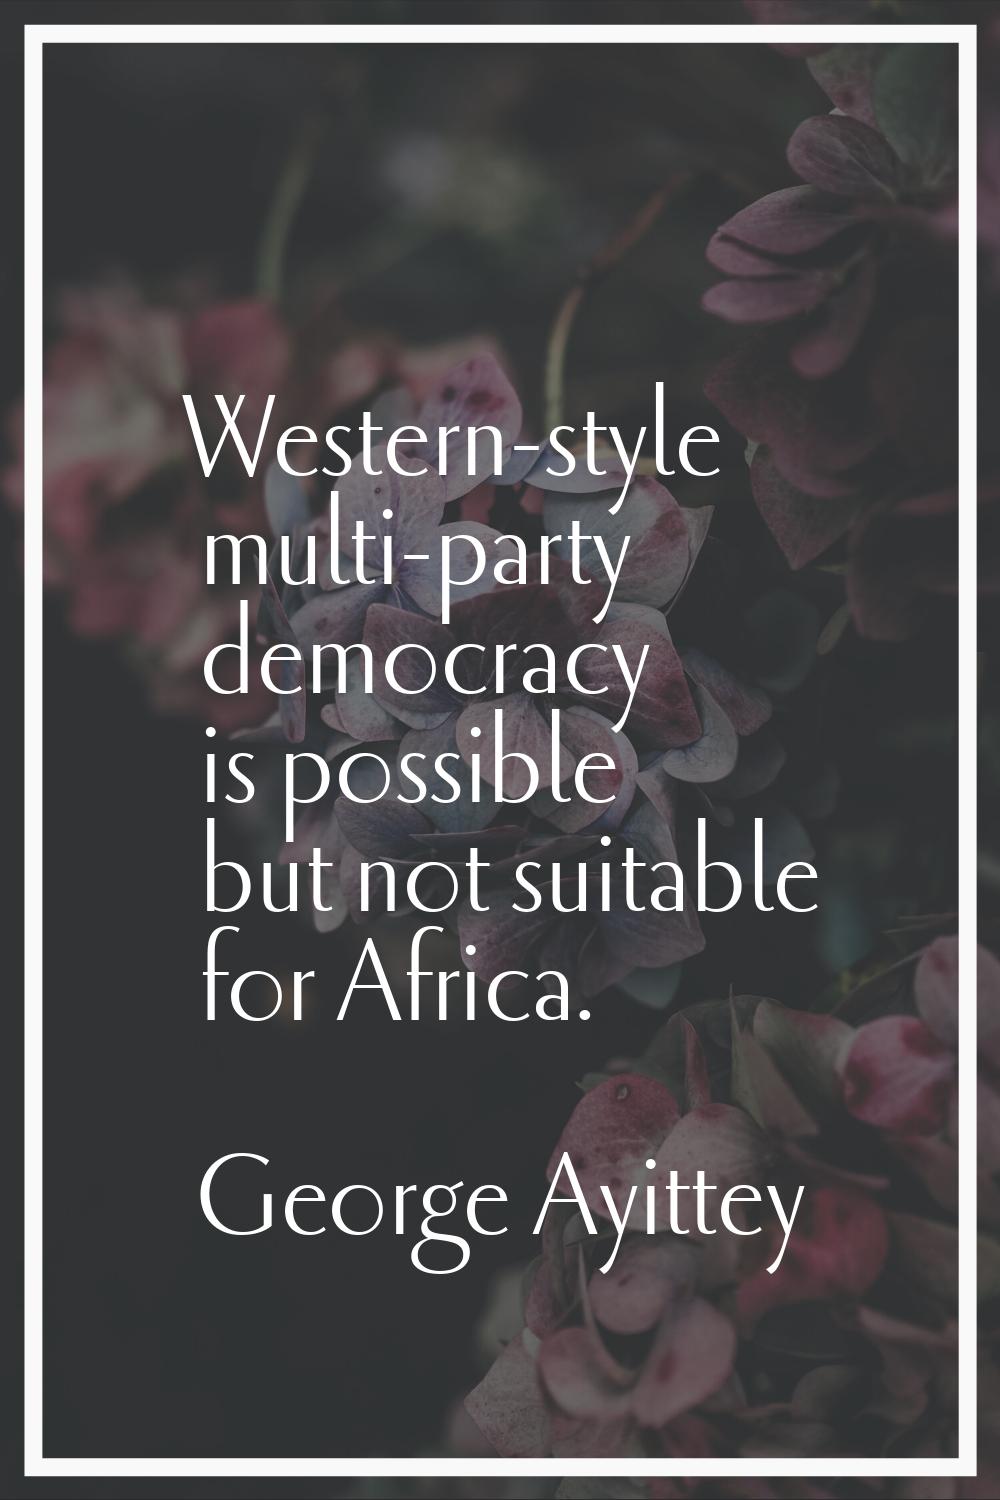 Western-style multi-party democracy is possible but not suitable for Africa.